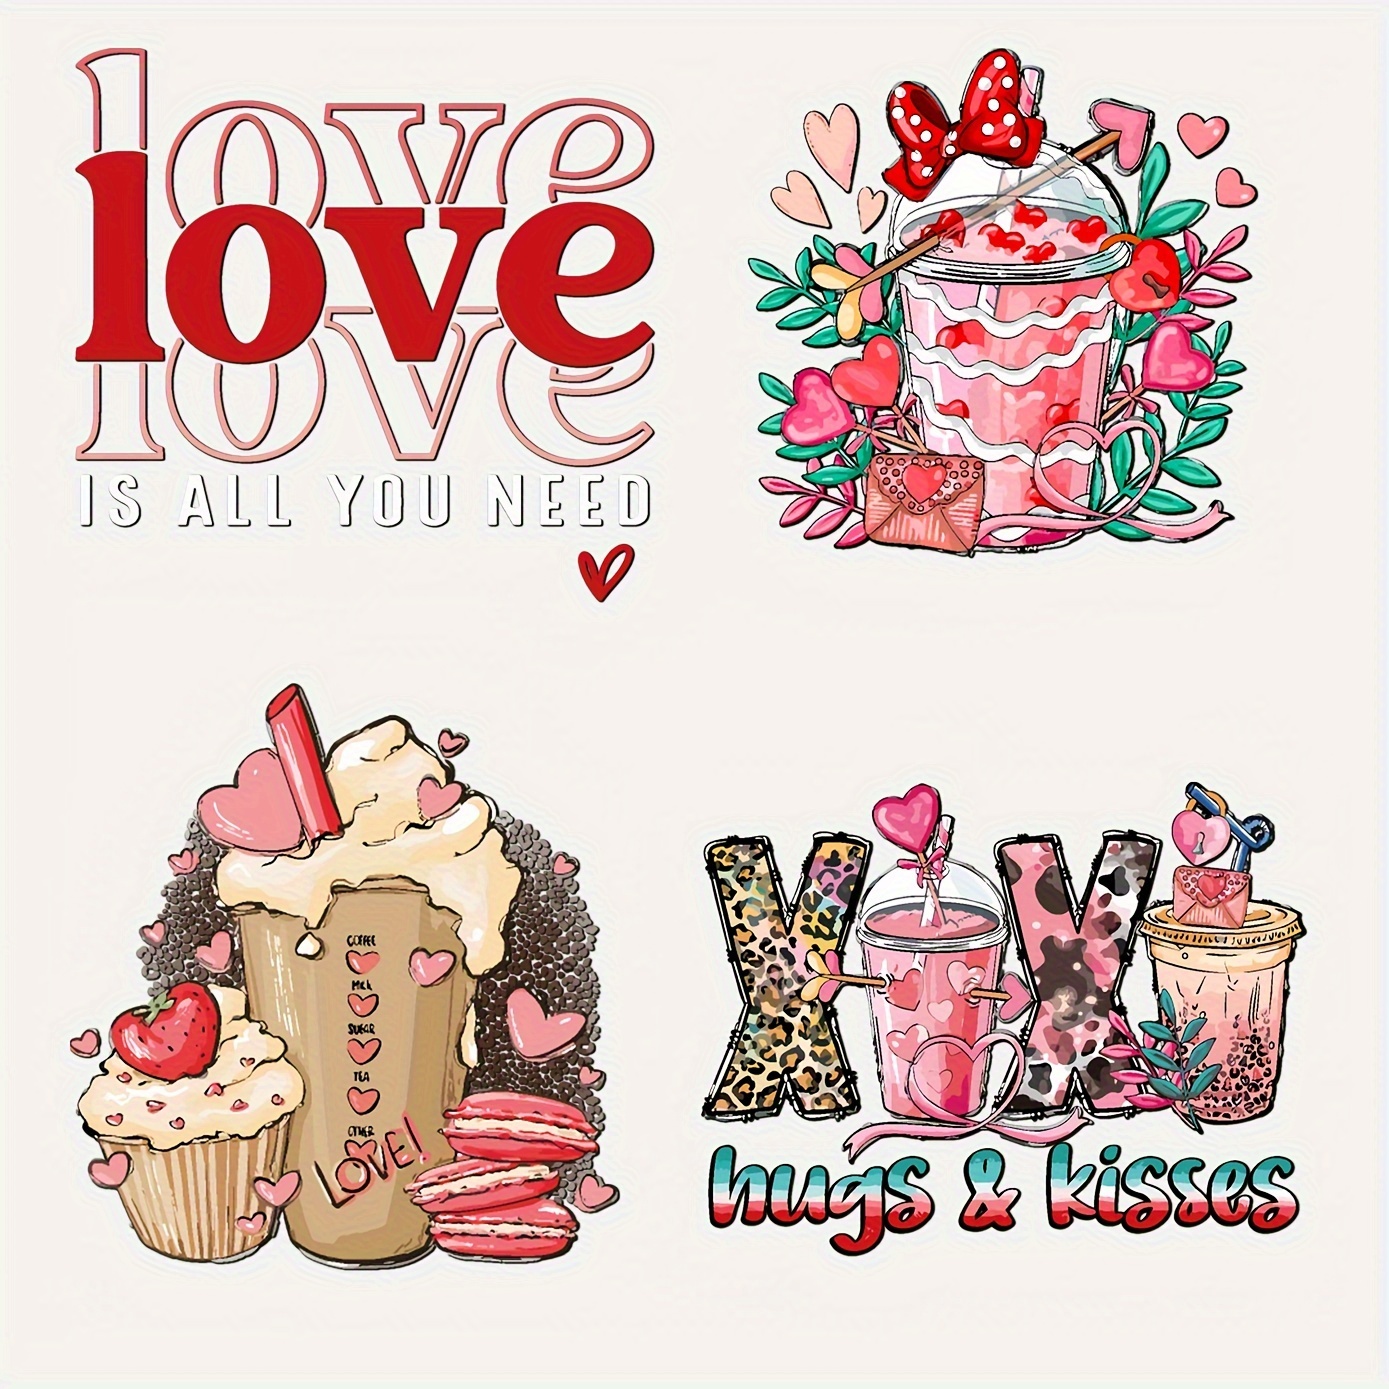 Valentine's Day Iron On Decals, Xo Love Heart Iron On Transfer Patches  Valentine Design Washable Heat Transfer Appliques Thermal Transfer Stickers  for